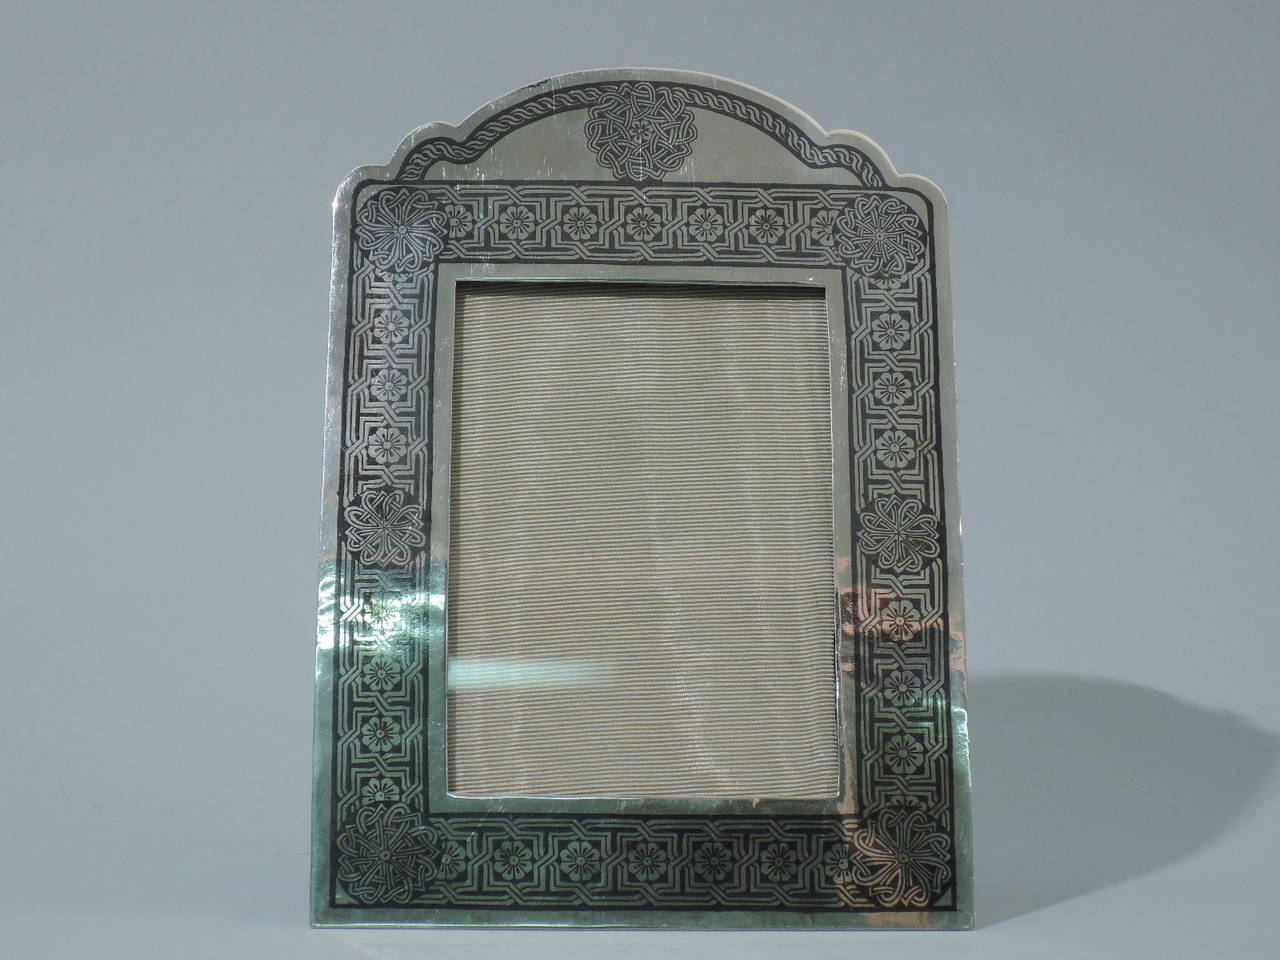 Exotic Persian silver picture frame, circa 1920. Rectangular window bordered by niello fretwork inset with flowers, and wheels with interlaced scrollwork at corners and top. Top is arched and scalloped with cable border. Perfect for a special